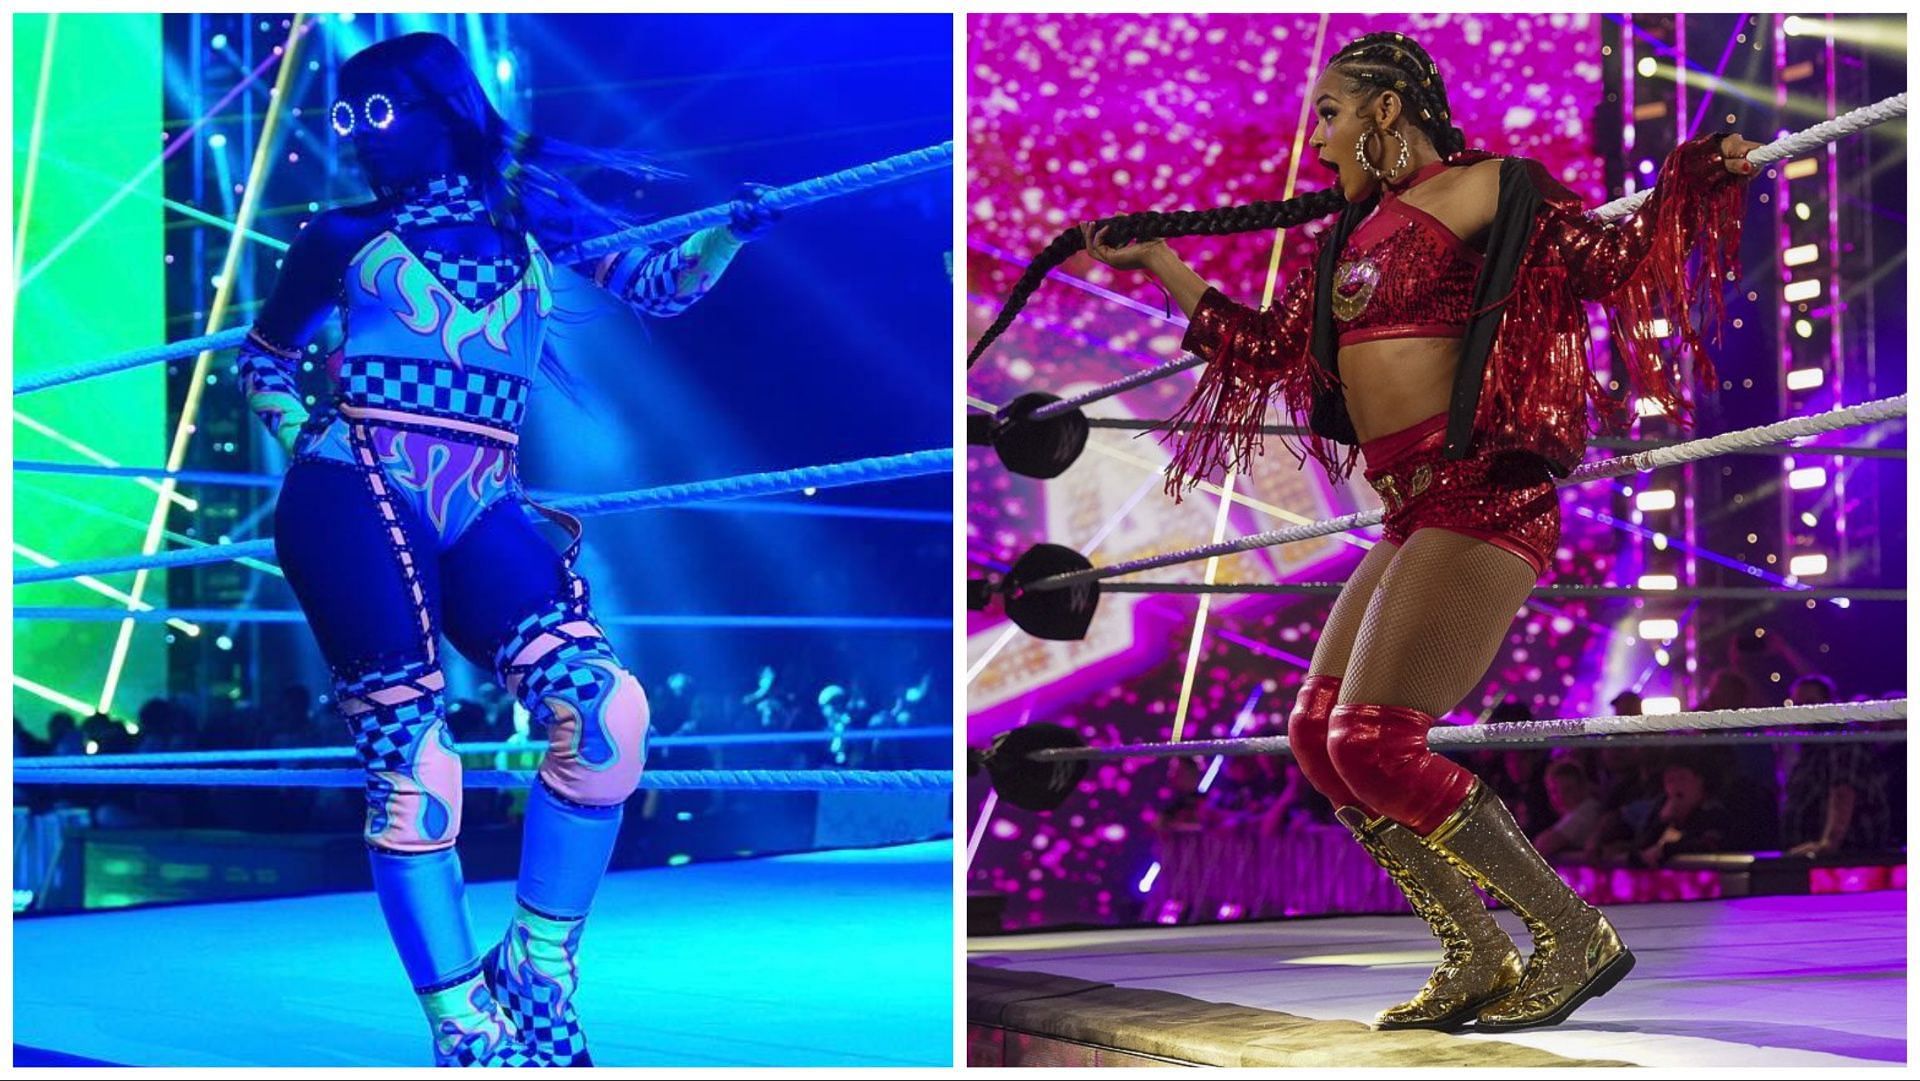 Naomi poses on the apron at WWE SmackDown, Bianca Belair poses on the apron